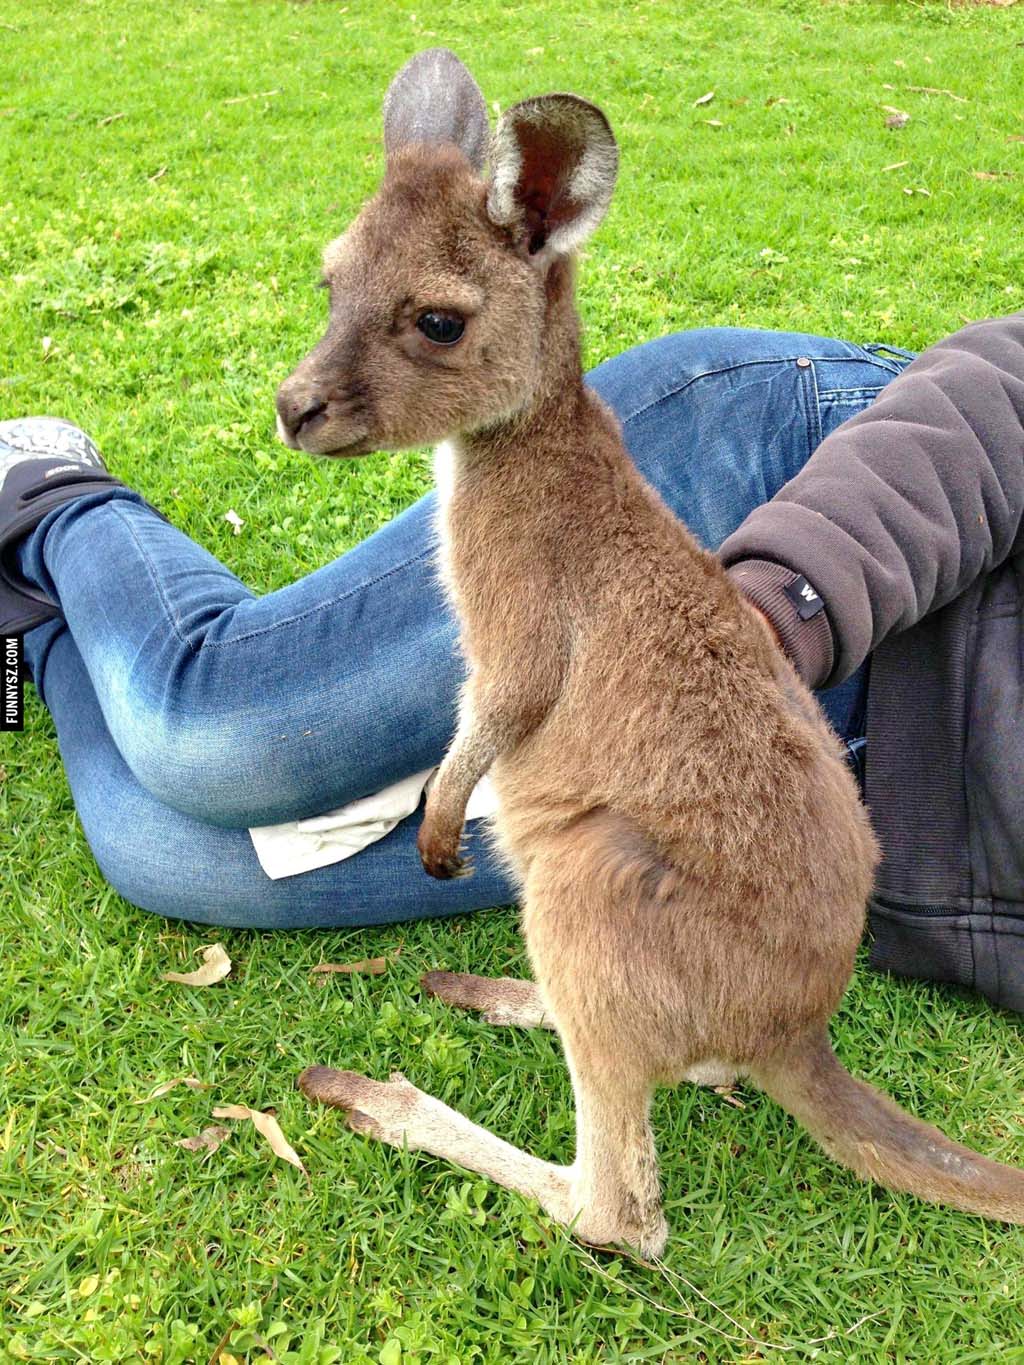 Cute Baby Kangaroo Get Wallpaper For Your Cell Phone